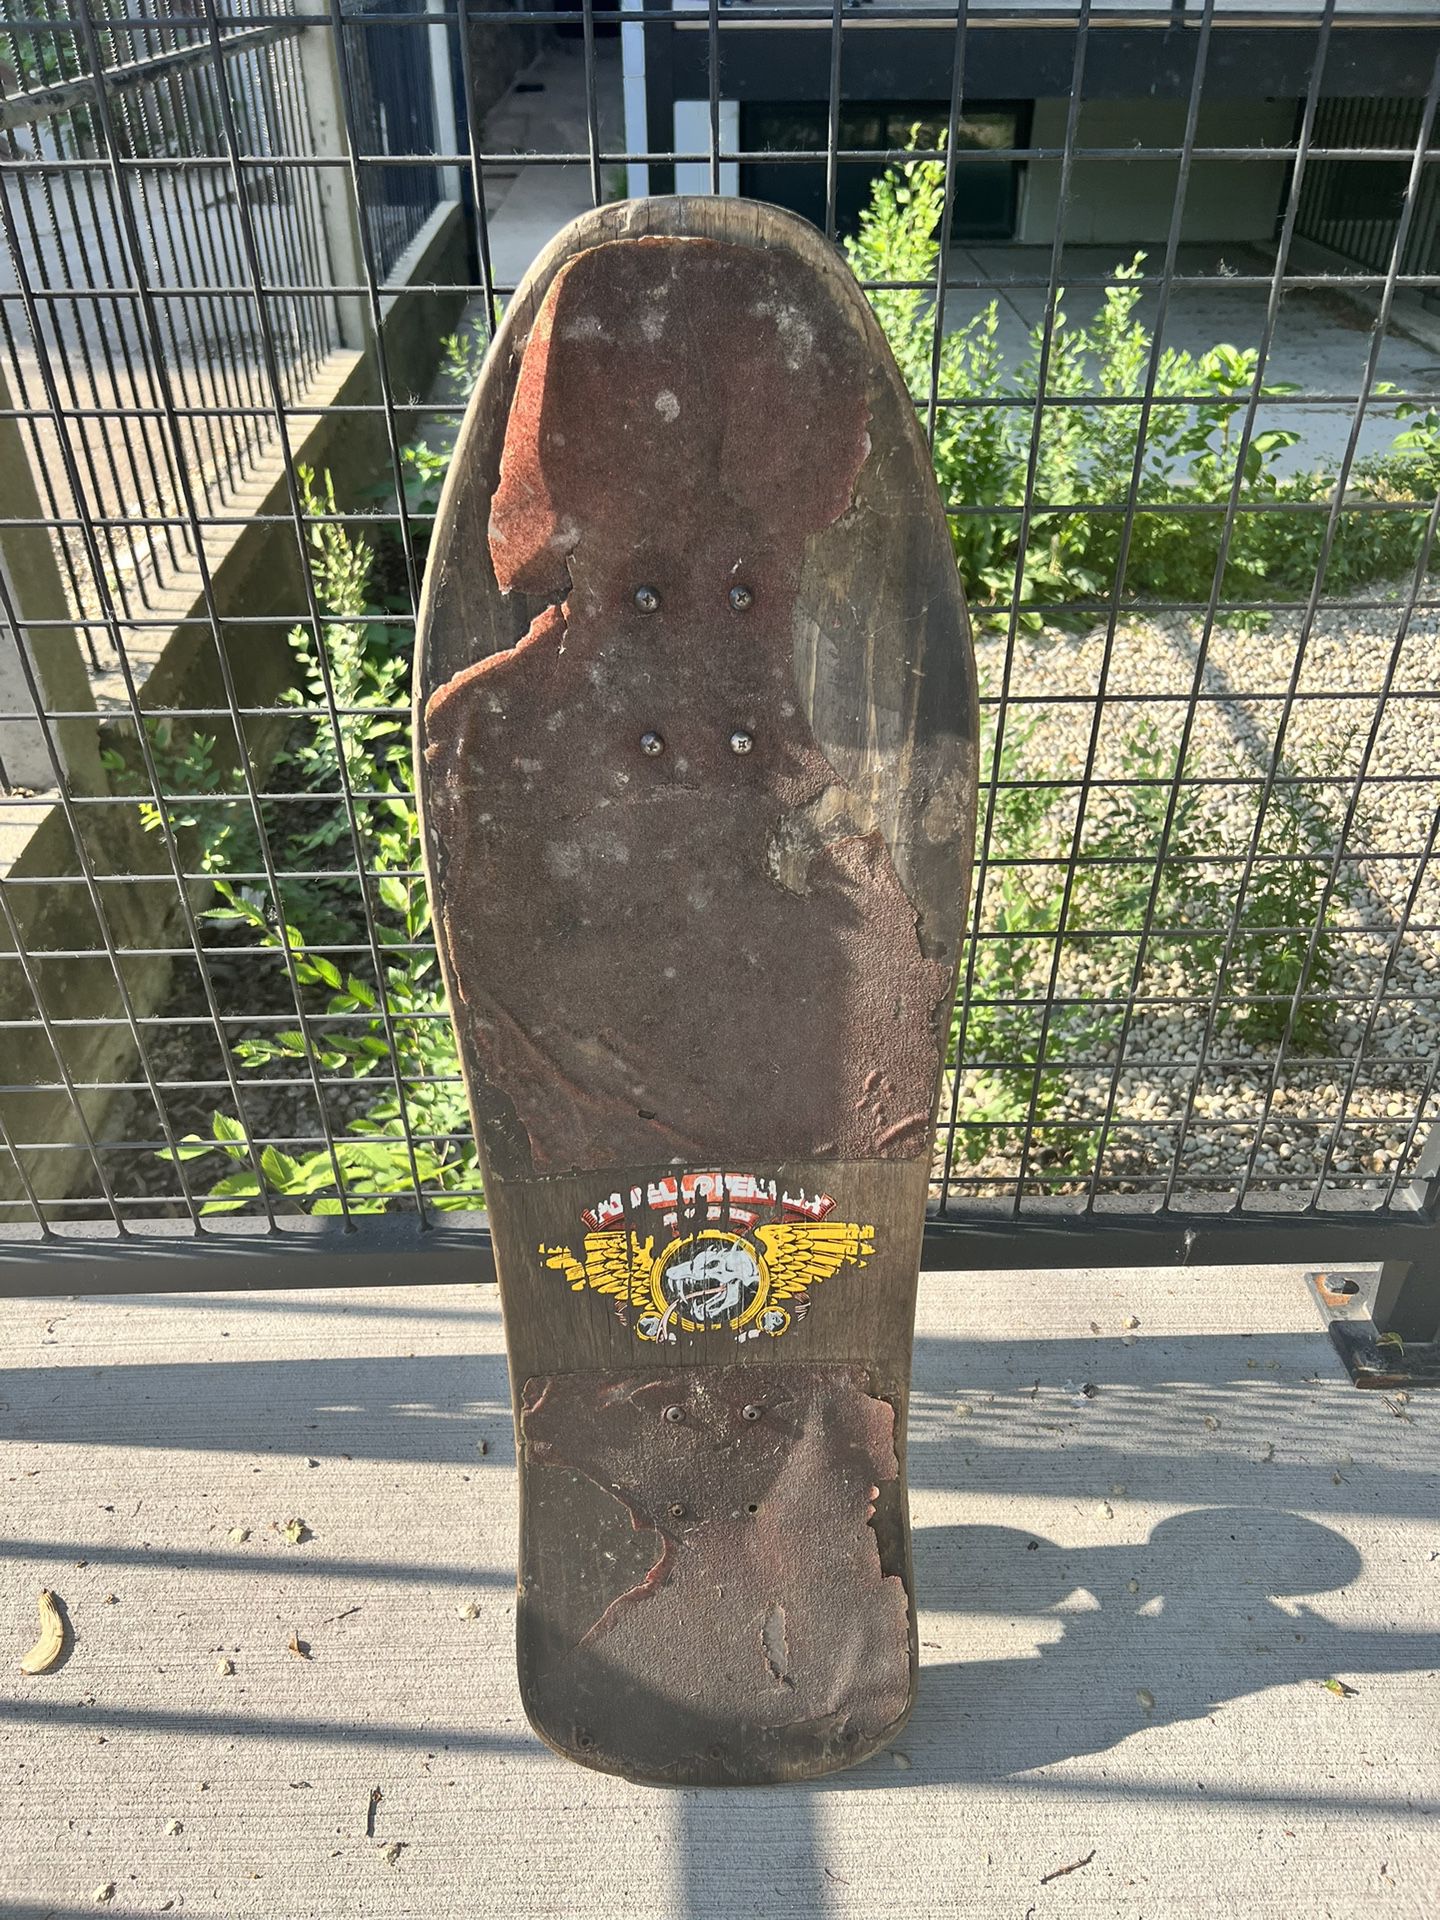 Vintage 1990 Powell Peralta Mike Mcgill Stinger Skateboard for Sale in ...